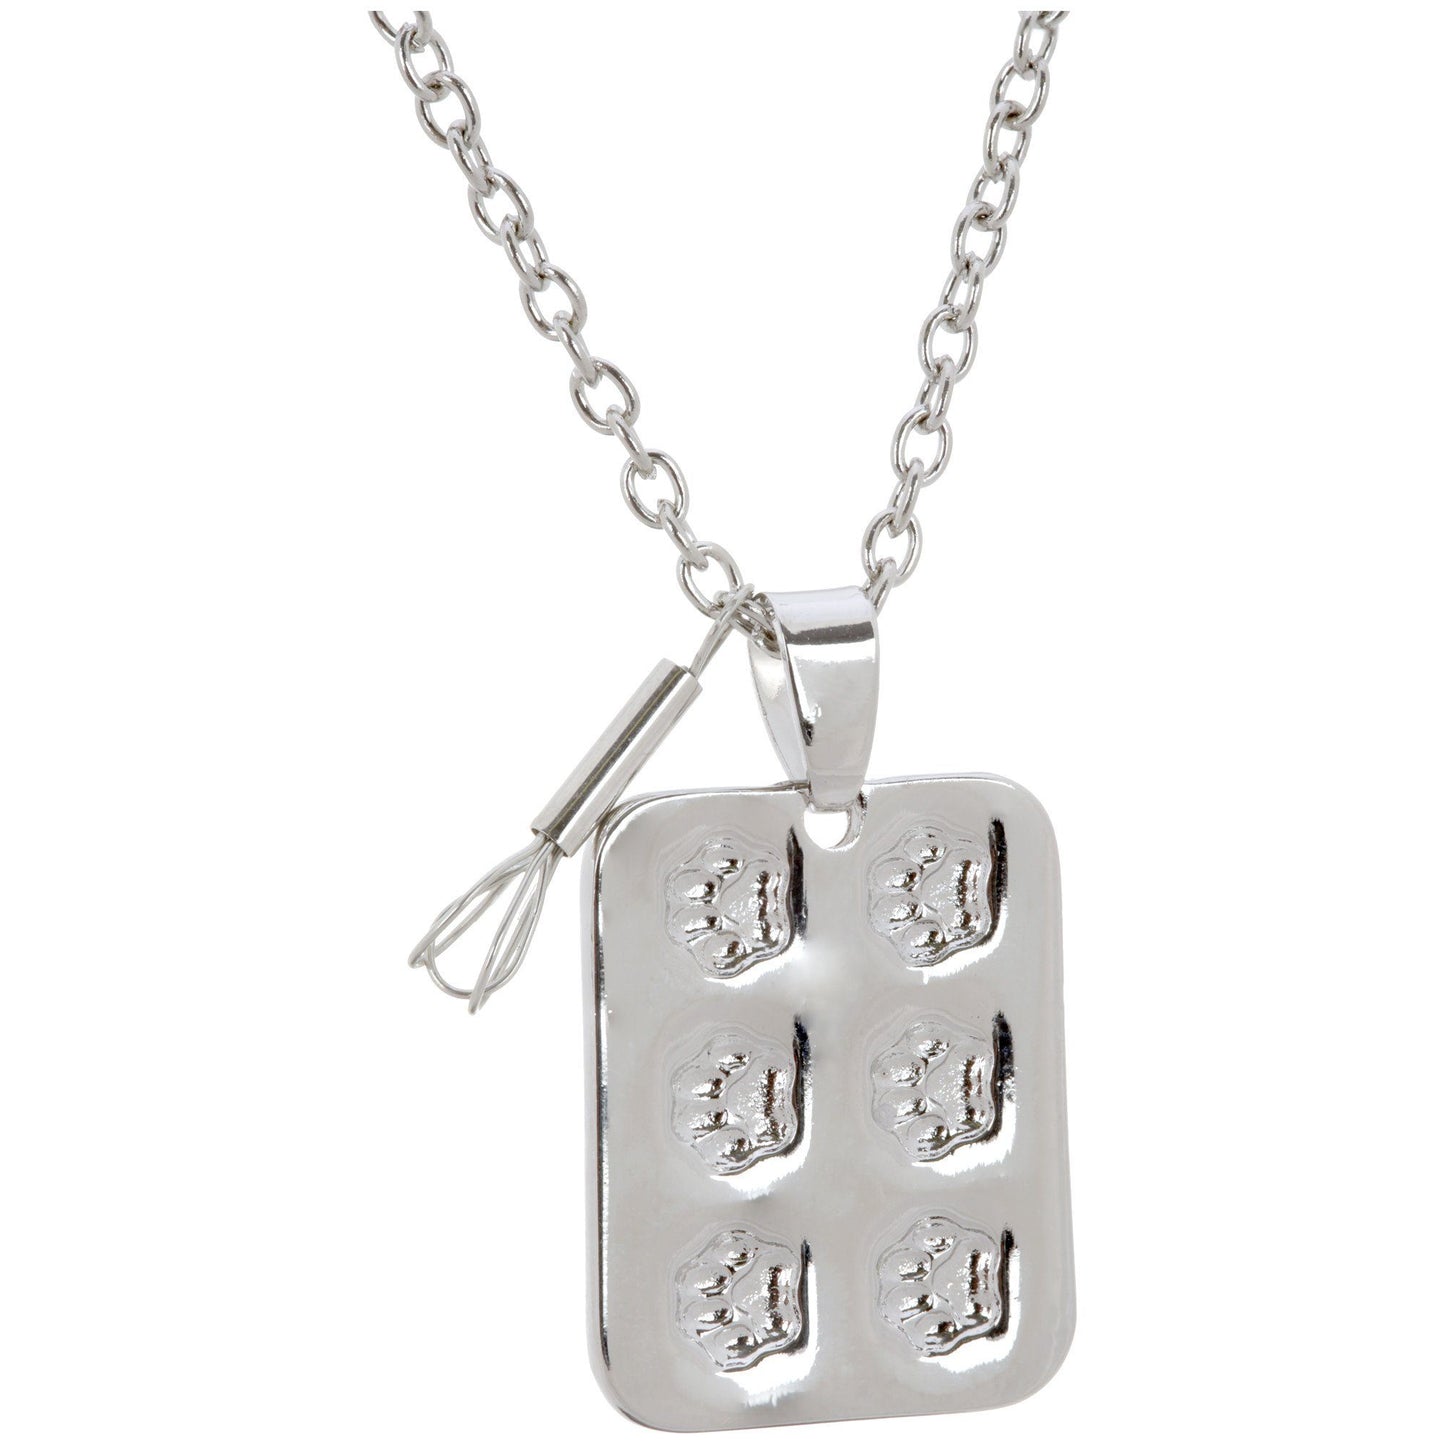 Paws To Bake Muffin Pan Necklace